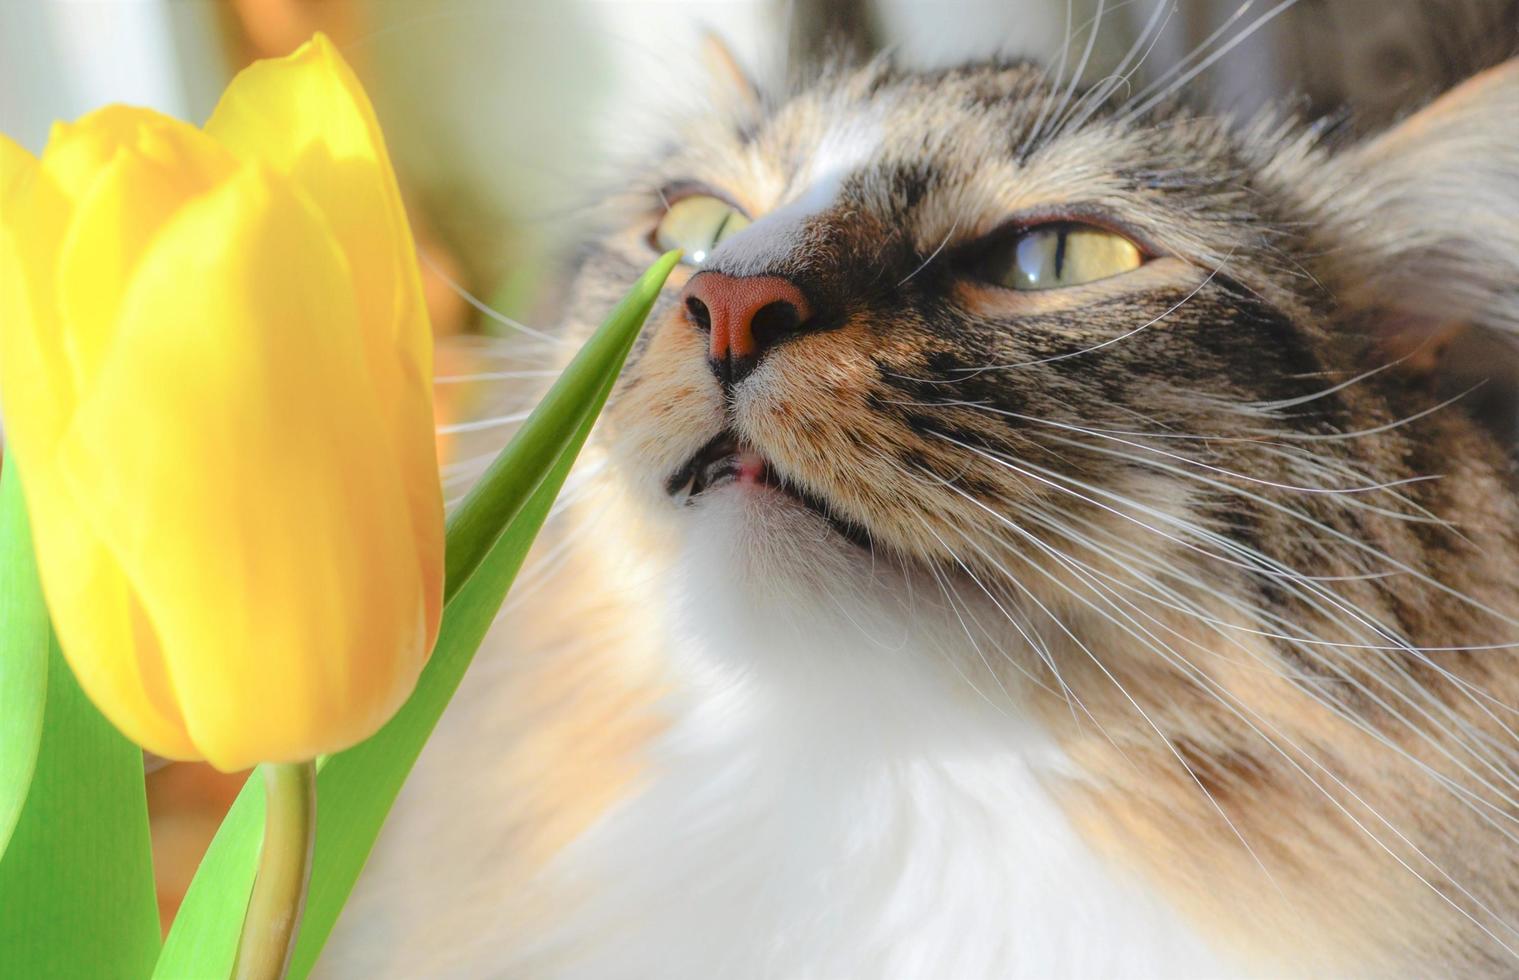 Fluffy cat and one yellow tulip. Siberian breed cat smelling a flower. Cat explore a flower. Interested cat's face.  Pet lifestyle concept. Cute green eyed cat in the sun. Spring has come. photo